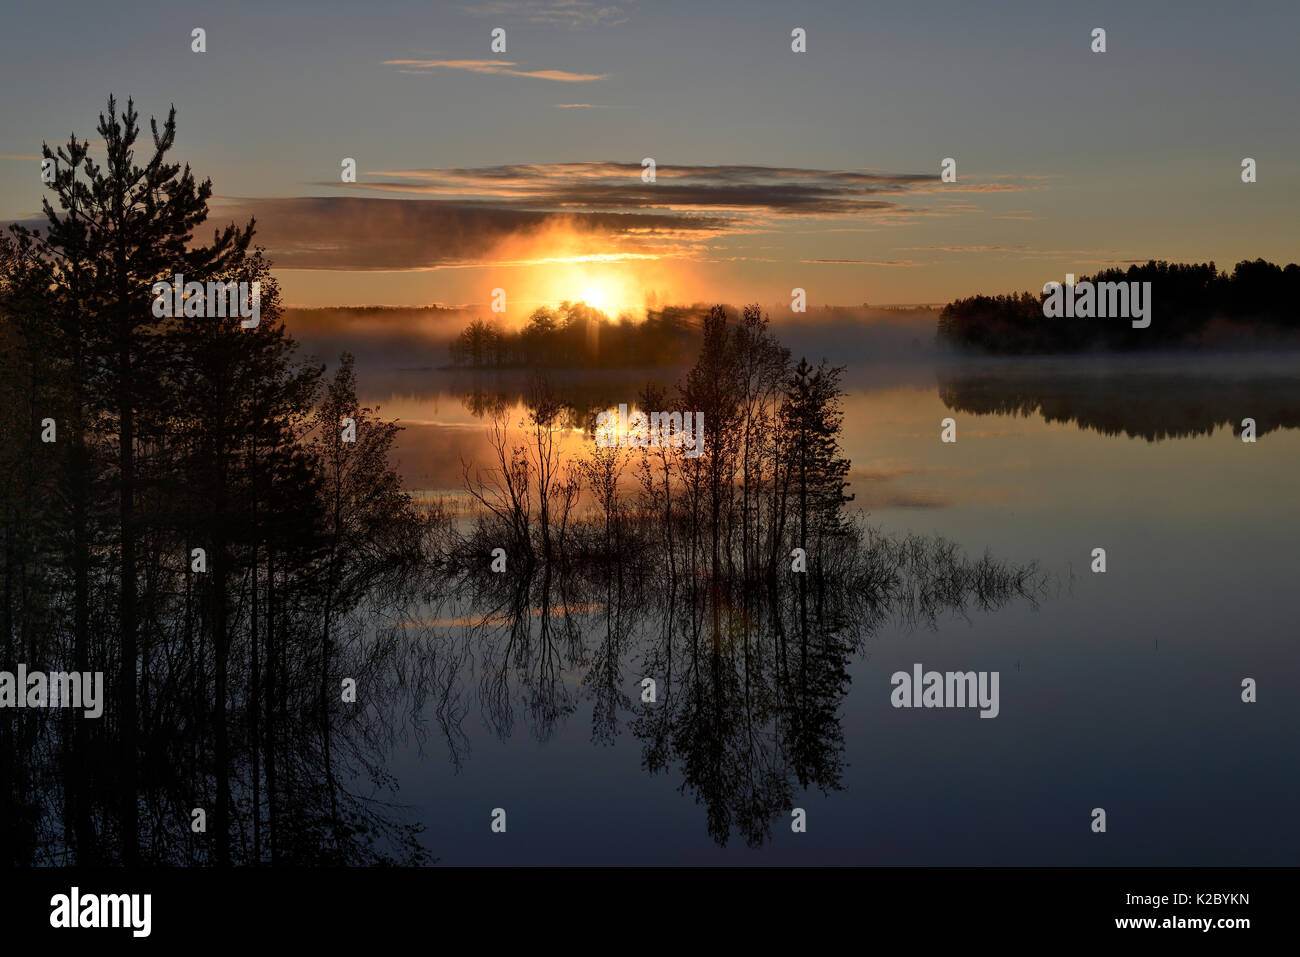 Wetland landscape at sunset, with trees reflected in the water, Lapponia, Finland, June 2015. Stock Photo